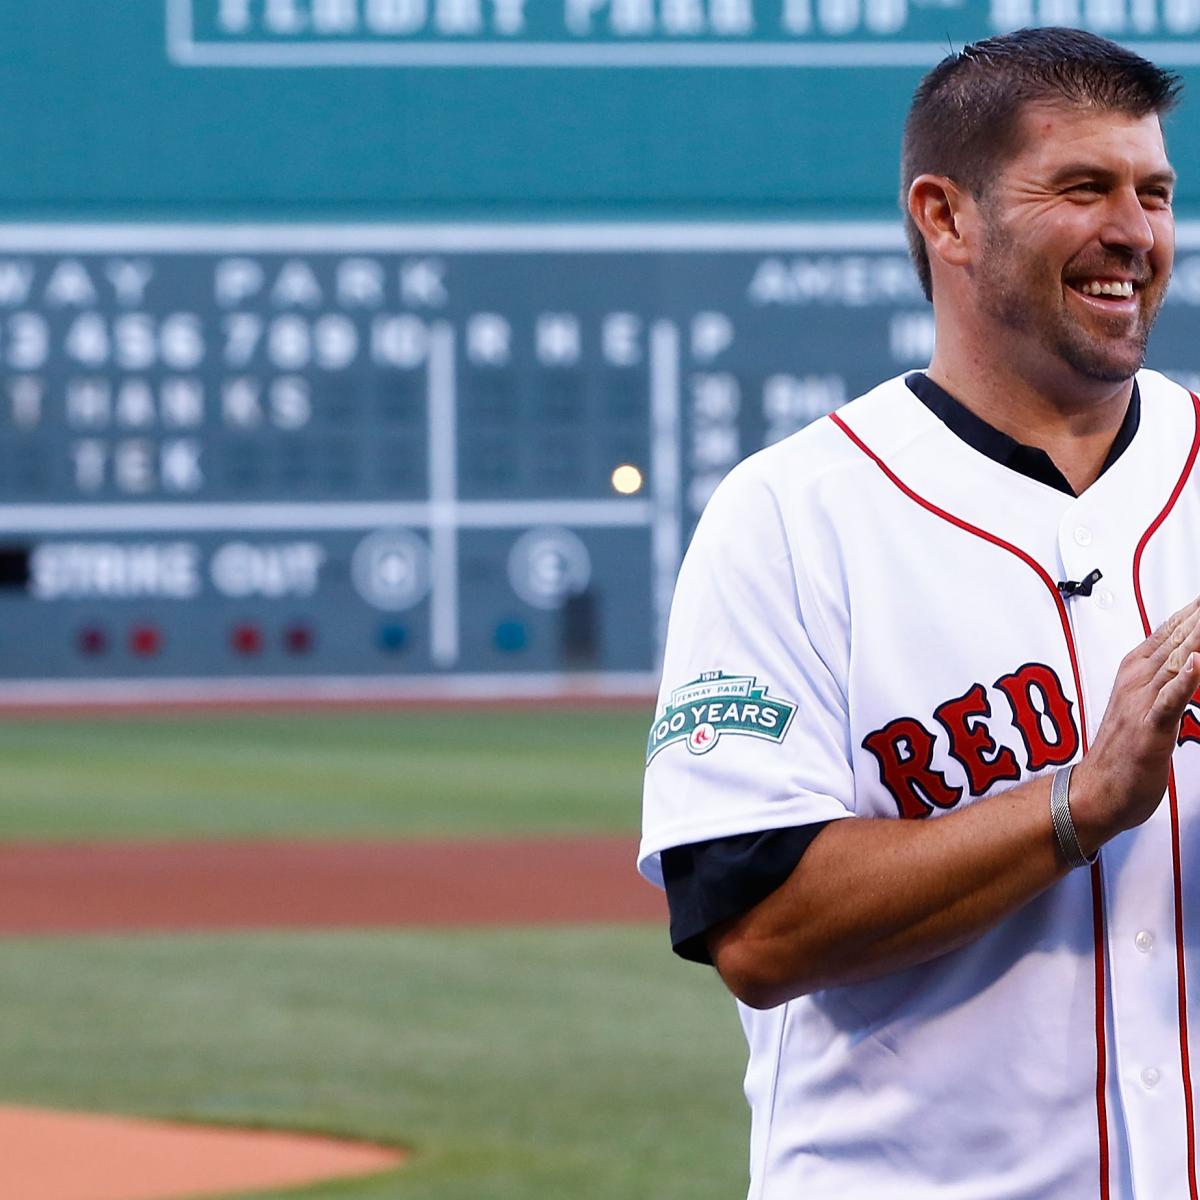 5 Reasons Jason Varitek Would Be Instant Hit as Boston Red Sox Manager